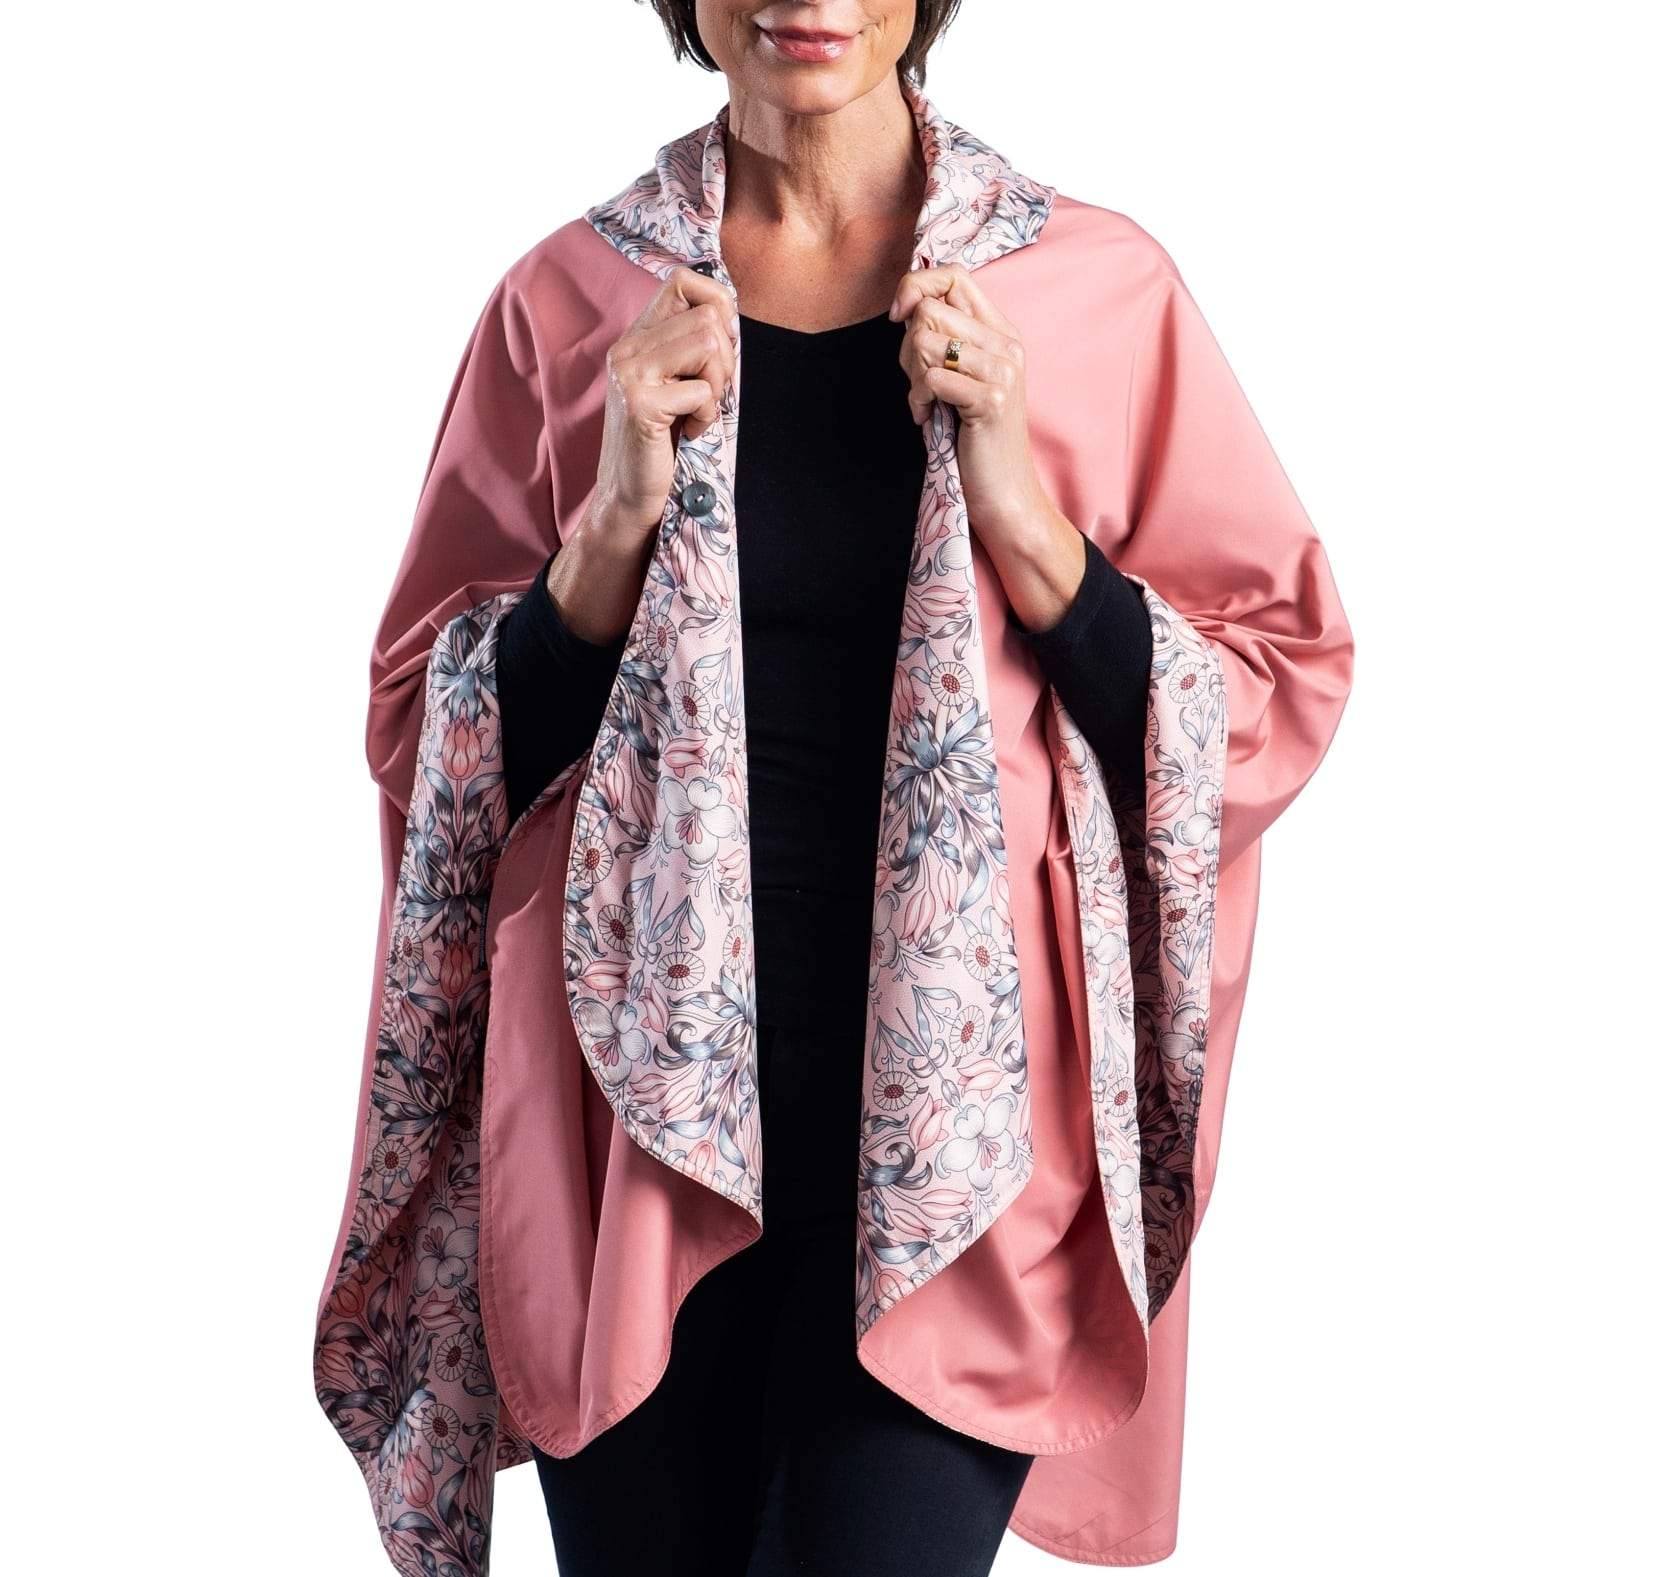 Women wearing a Blush & William Morris "Tulips" RainCaper travel cape with the Blush side out, revealing the William Morris "Tulips" print at the lapels and cuffs